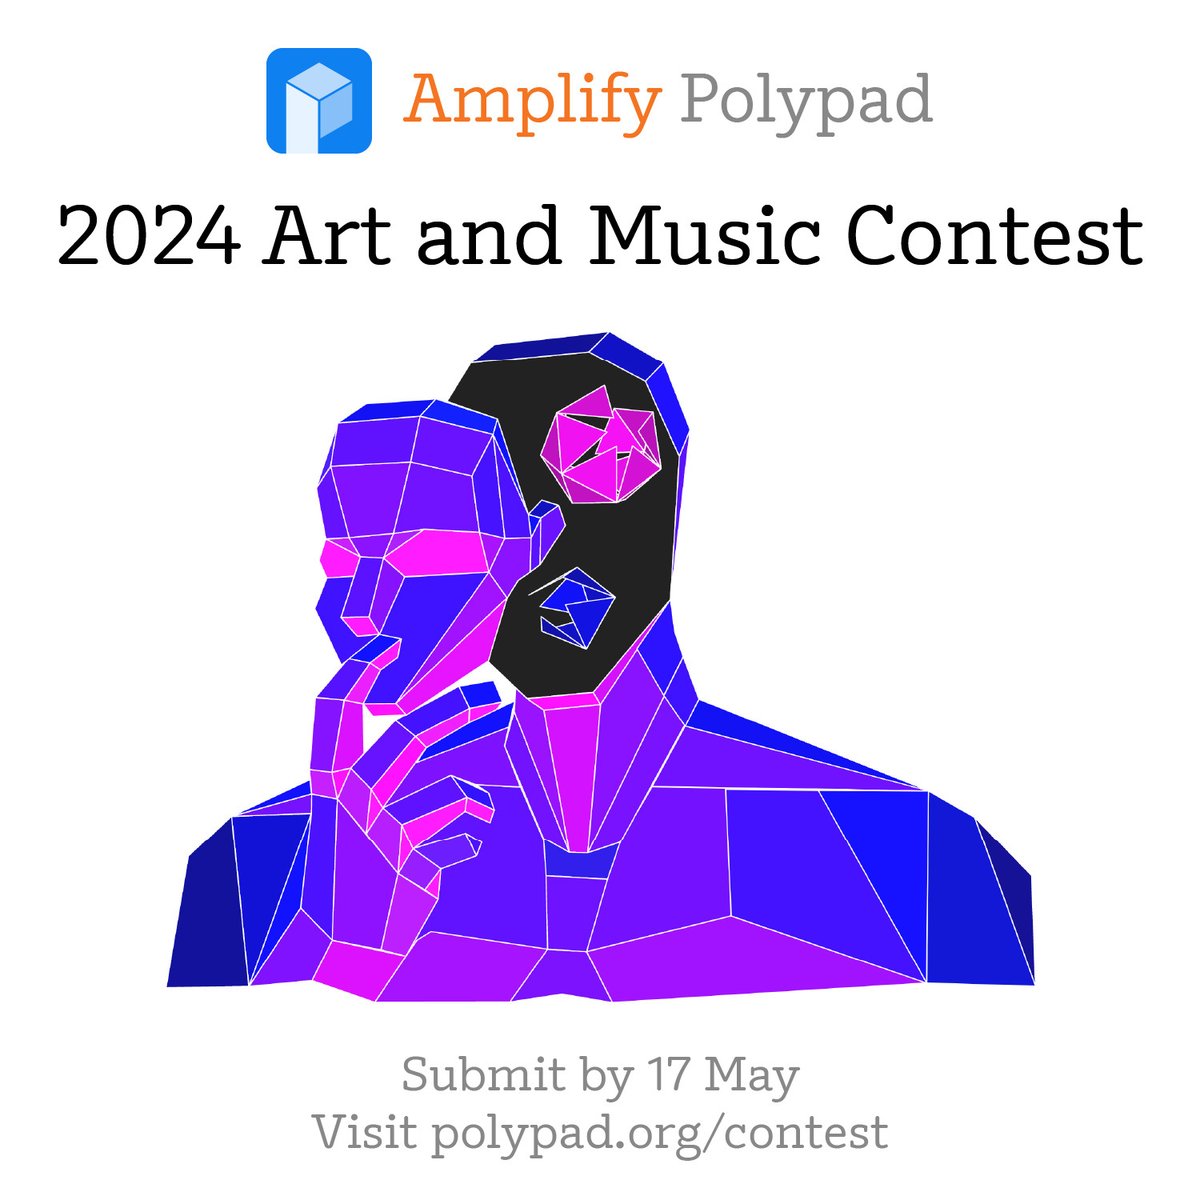 Last week, we announced the 2024 Polypad Art + Music Contest. Enjoy this winning entry from our last contest and learn more about the 2024 contest at polypad.org/contest